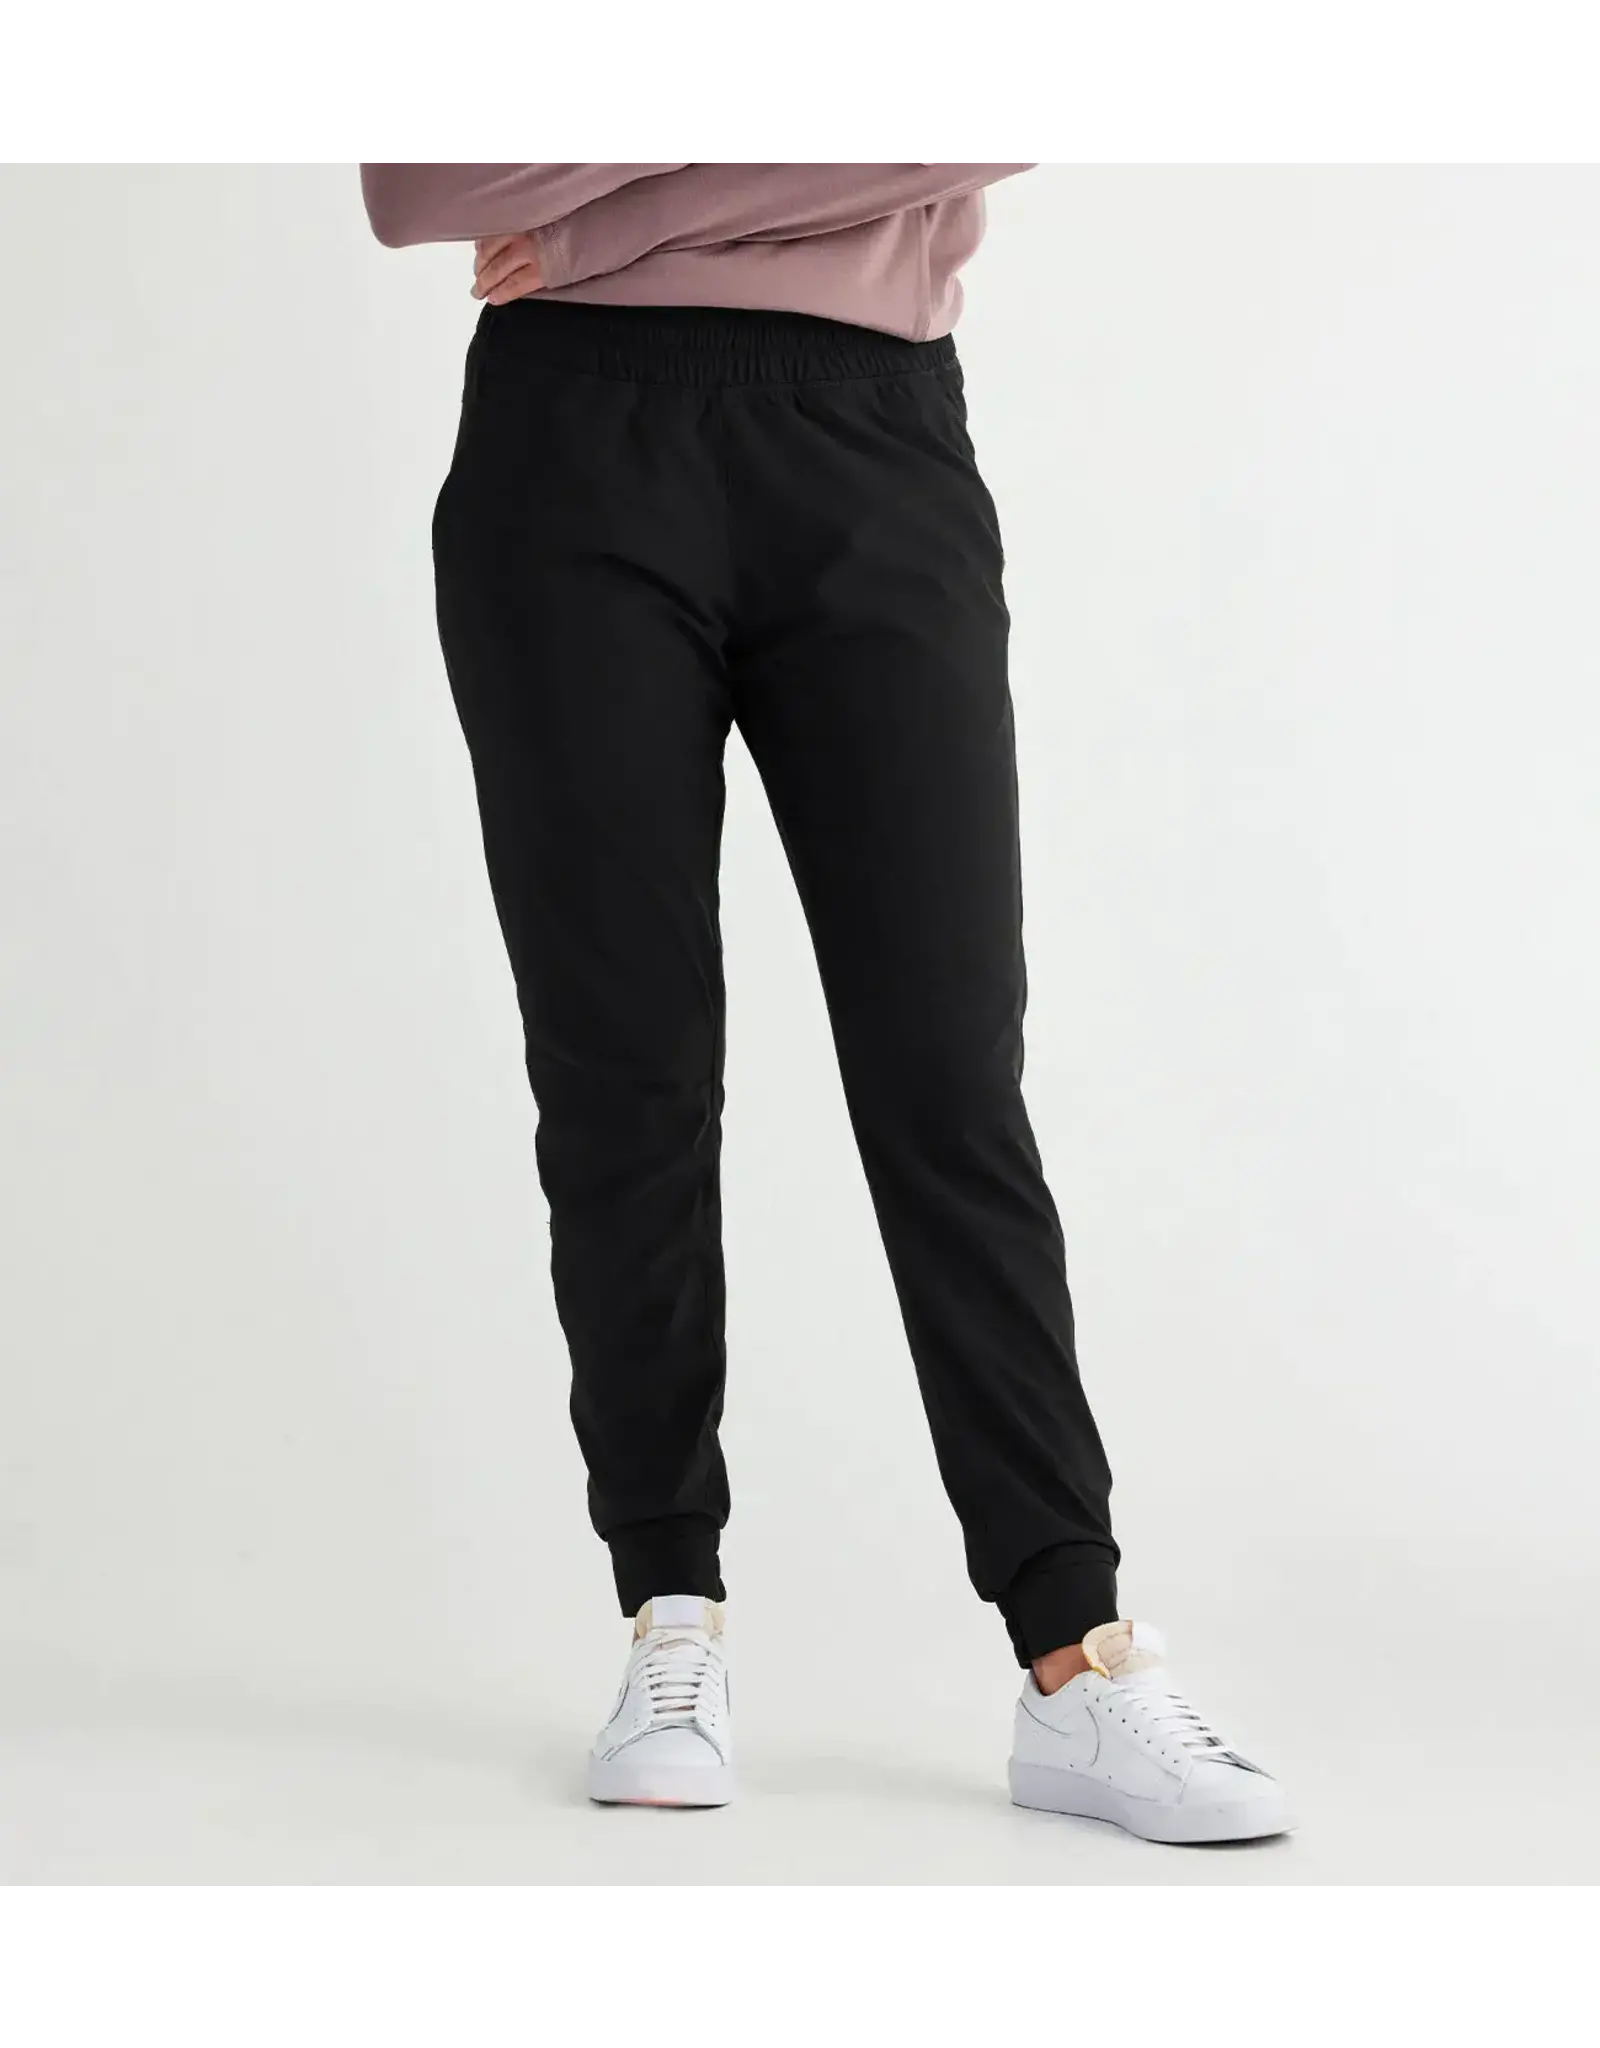 FREEFLY Freefly - Women's Breeze Pull-On Jogger